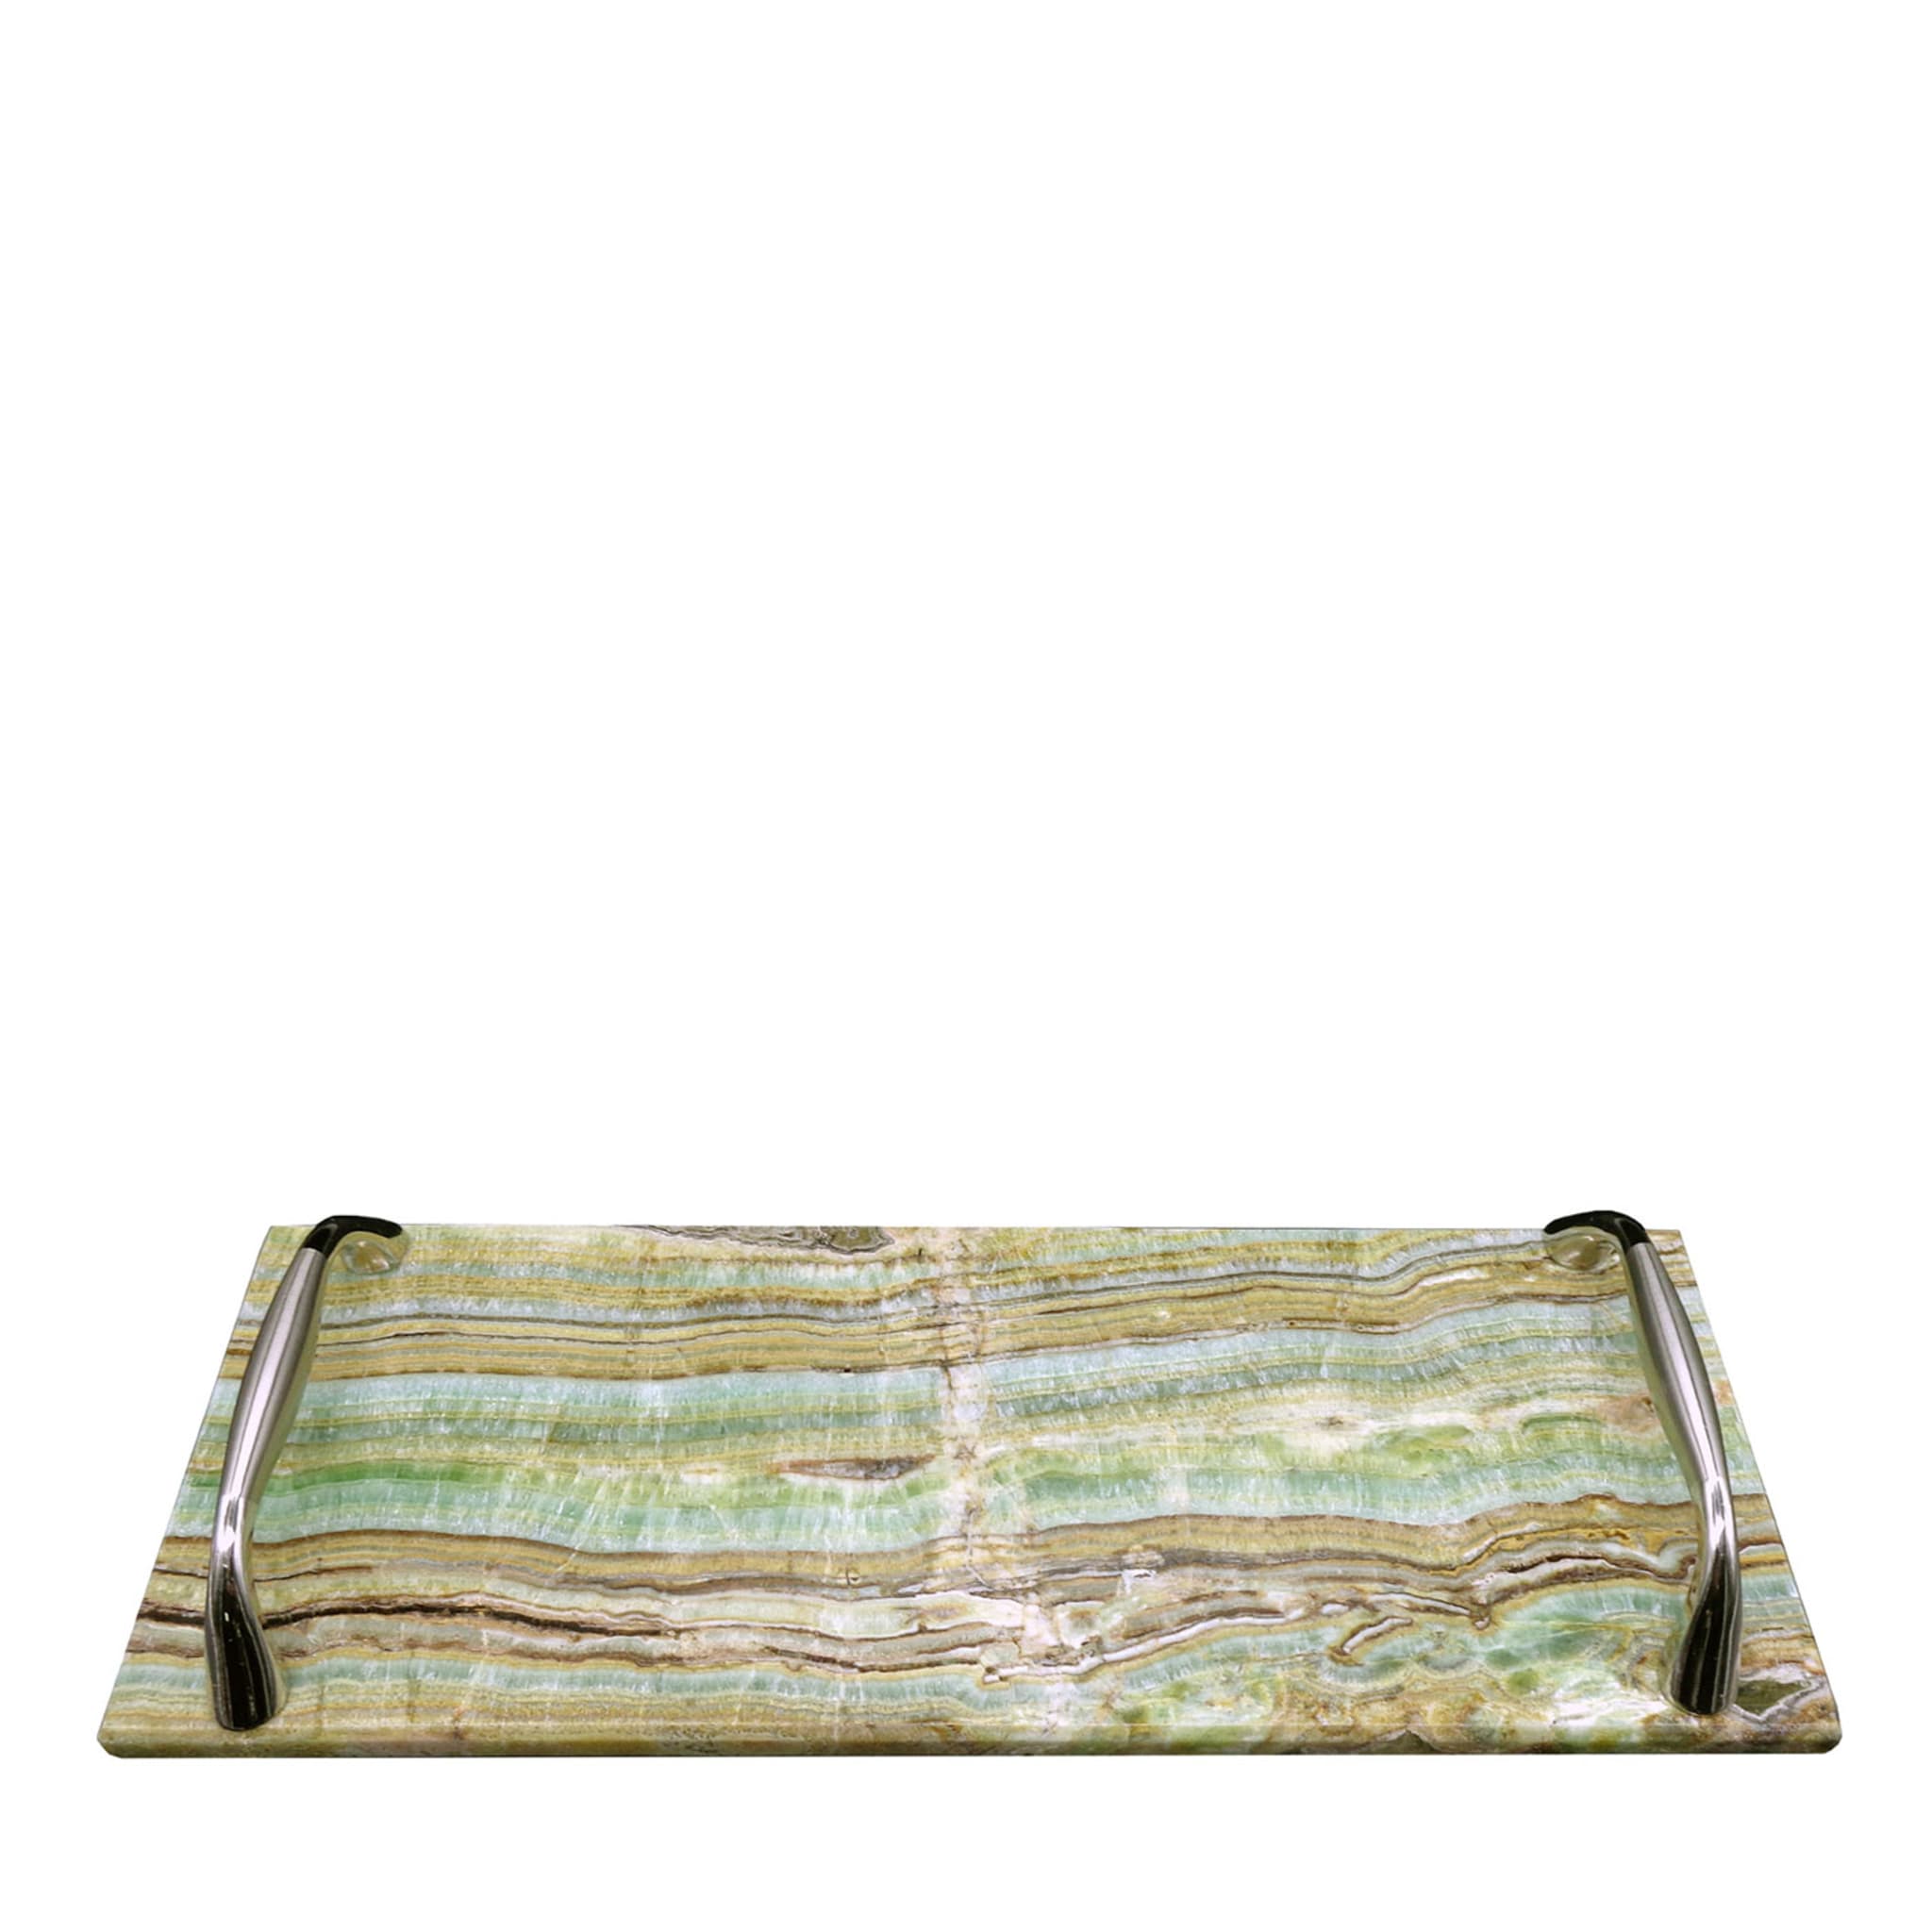 Rectangular Emerald Onyx Tray with Steel Handles #2 - Main view